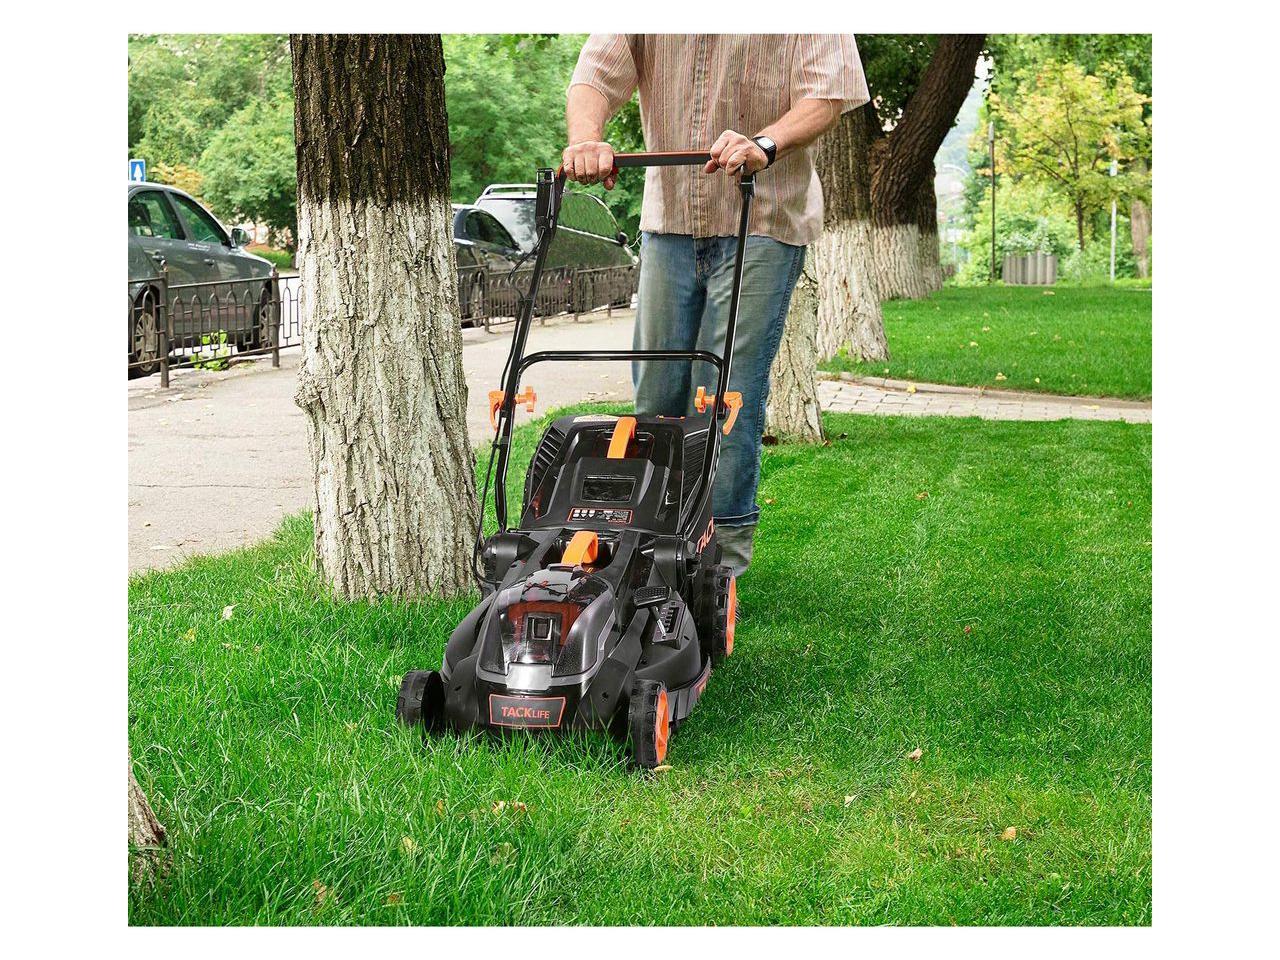 TACKLIFE 16-Inch 40V Brushless Lawn Mower, 4.0AH Battery, 6 Mowing